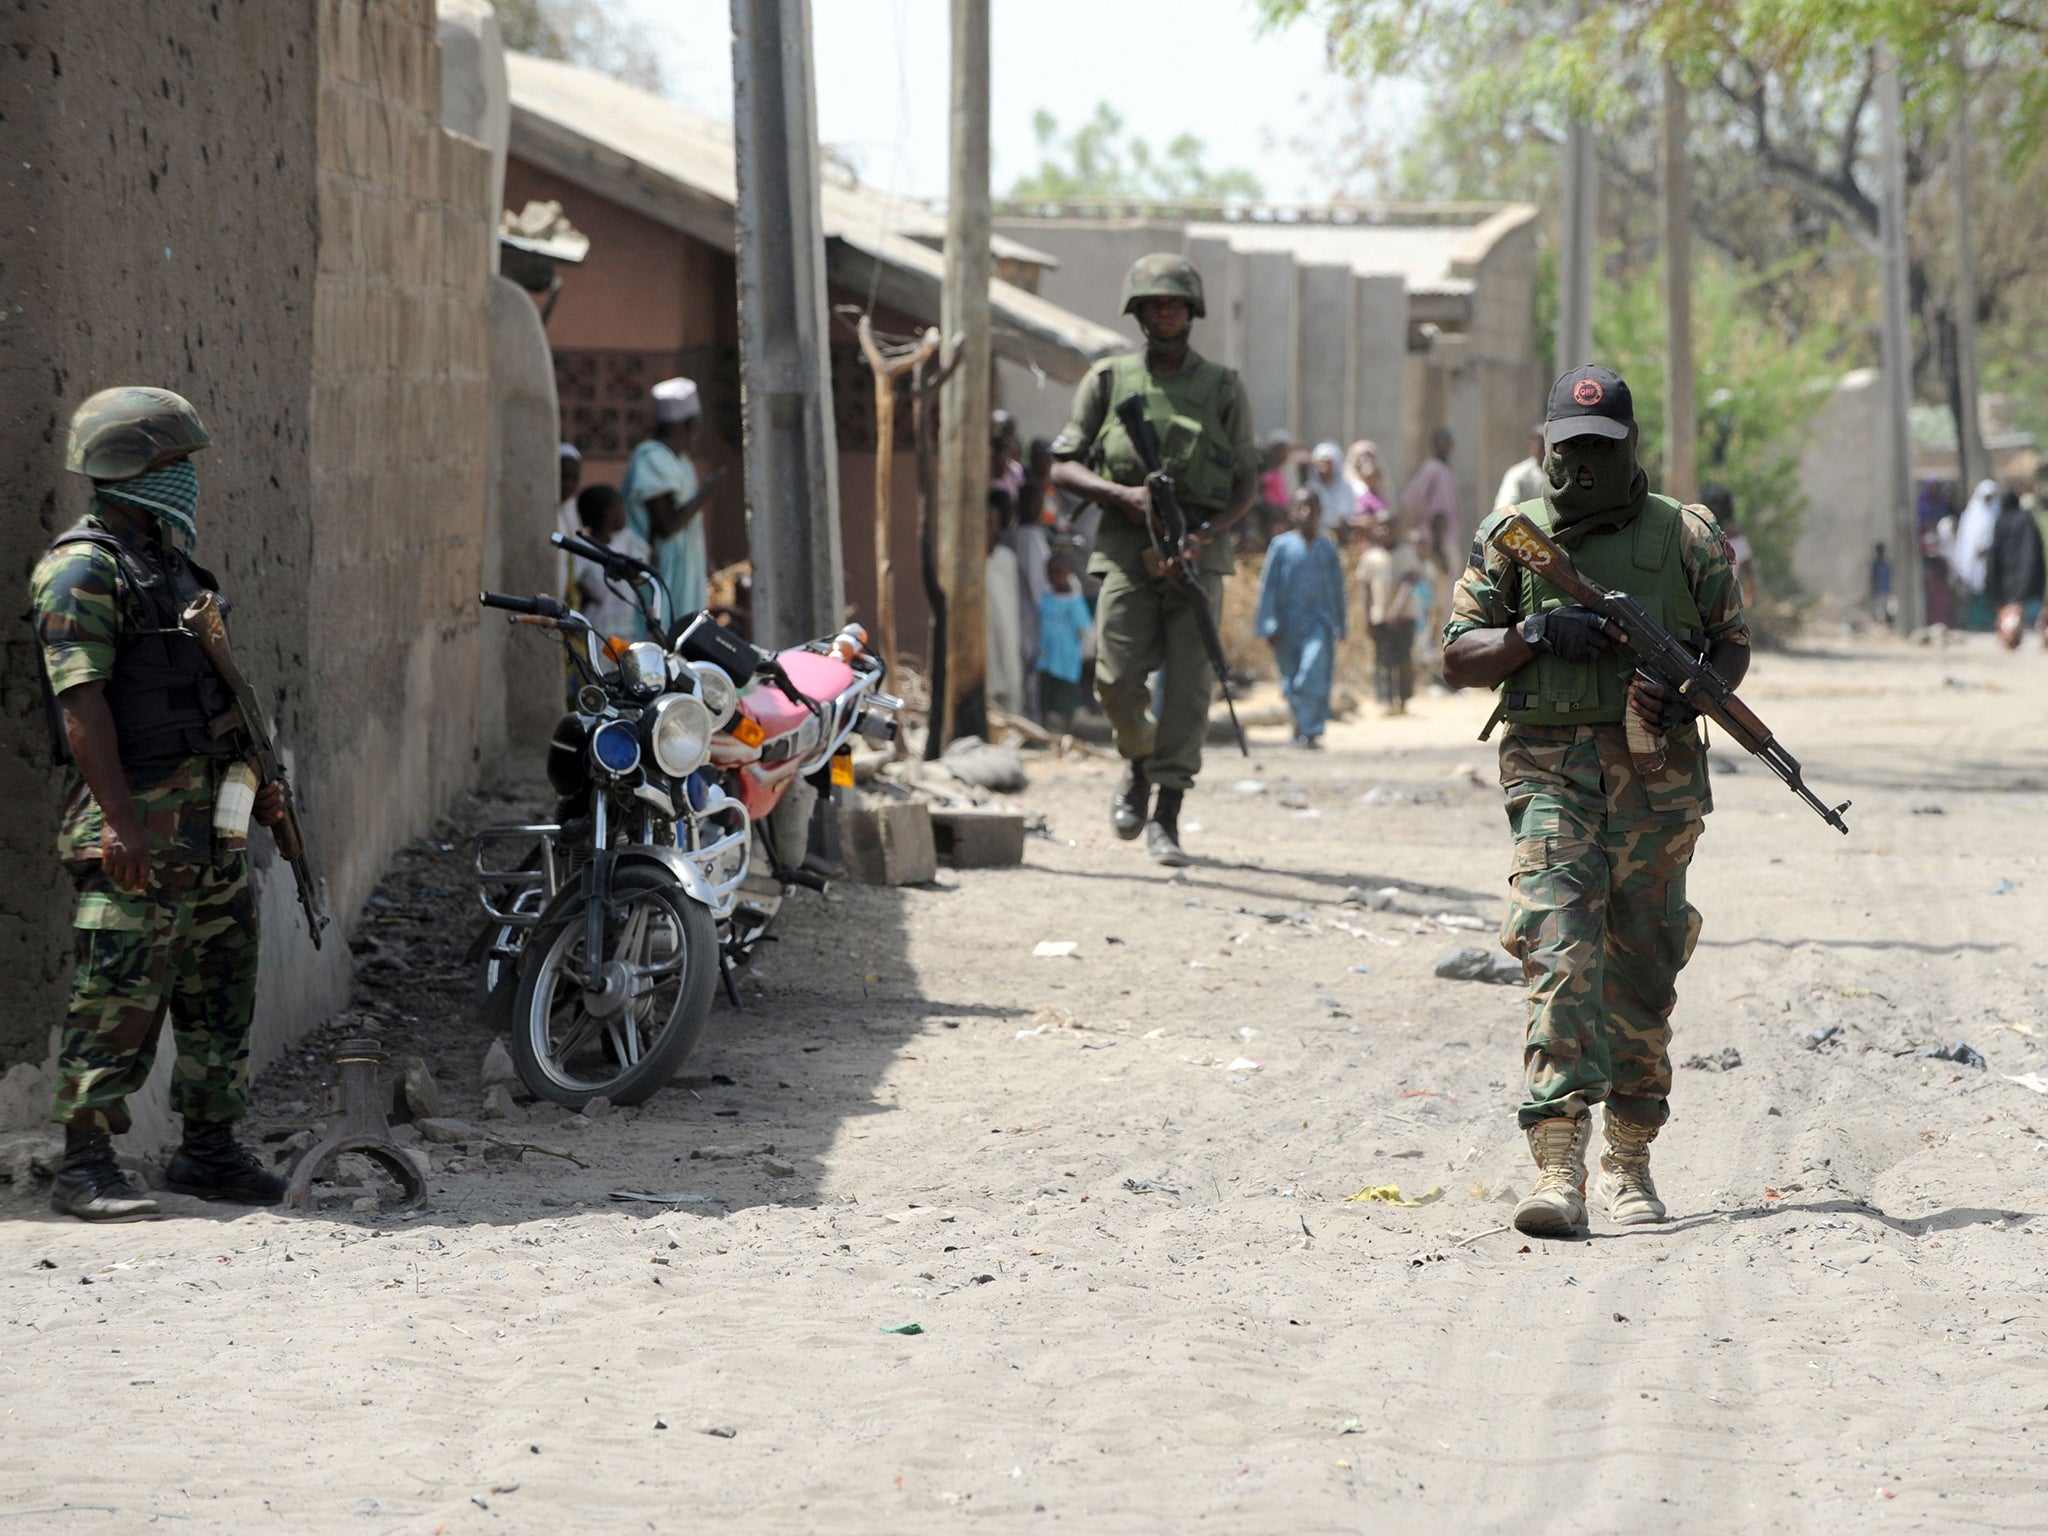 Soldiers walking in the street in the remote northeast town of Baga, Borno State